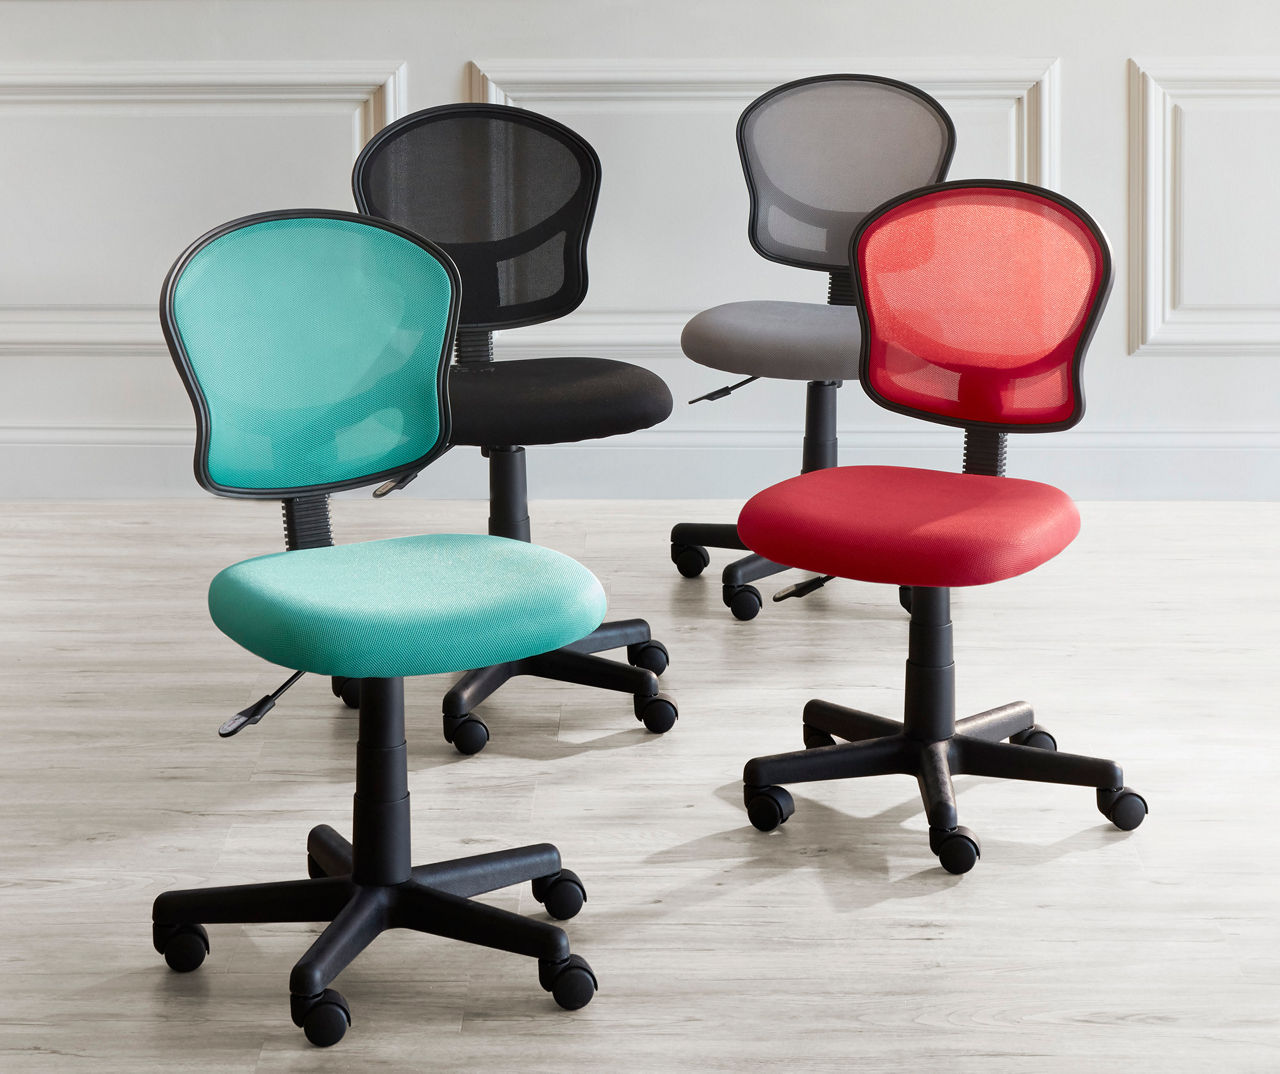 https://assets.biglots.com/is/image/biglots/justhome_desk_chairs?$small$